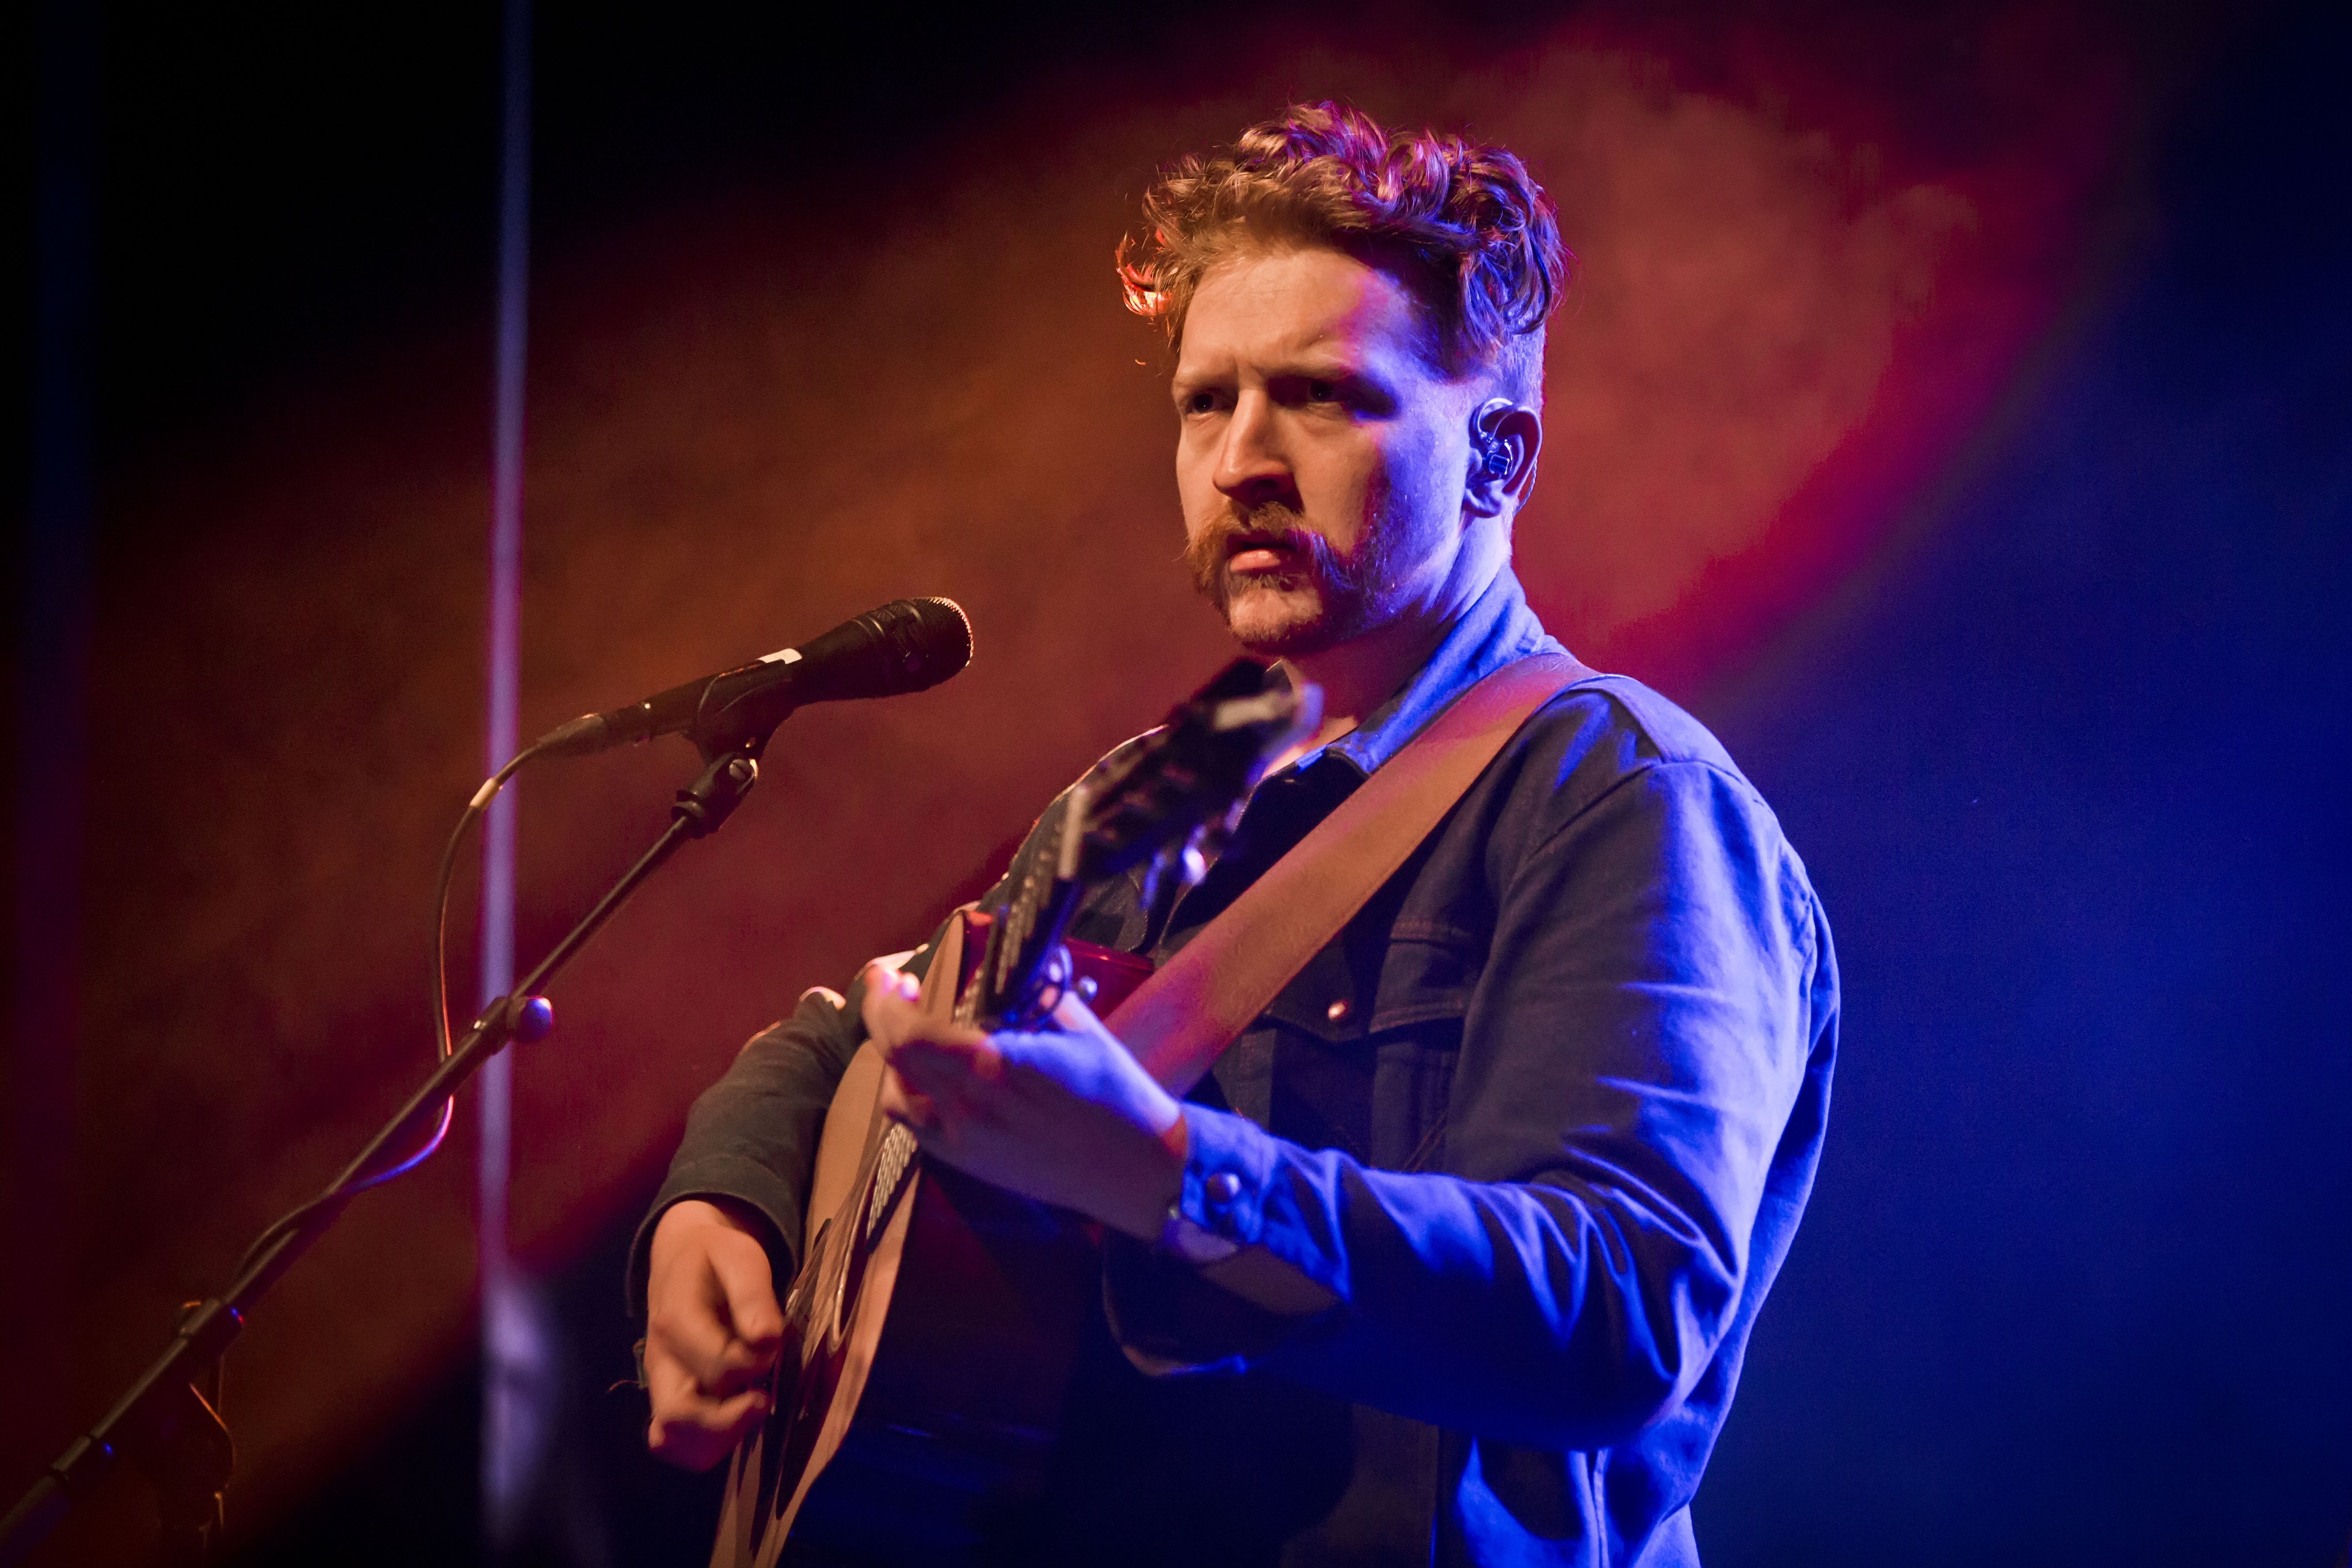 Tyler Childers on stage during a concert at the Columbia Theater in 2020 in Berlin, Germany. | Source: Getty Images